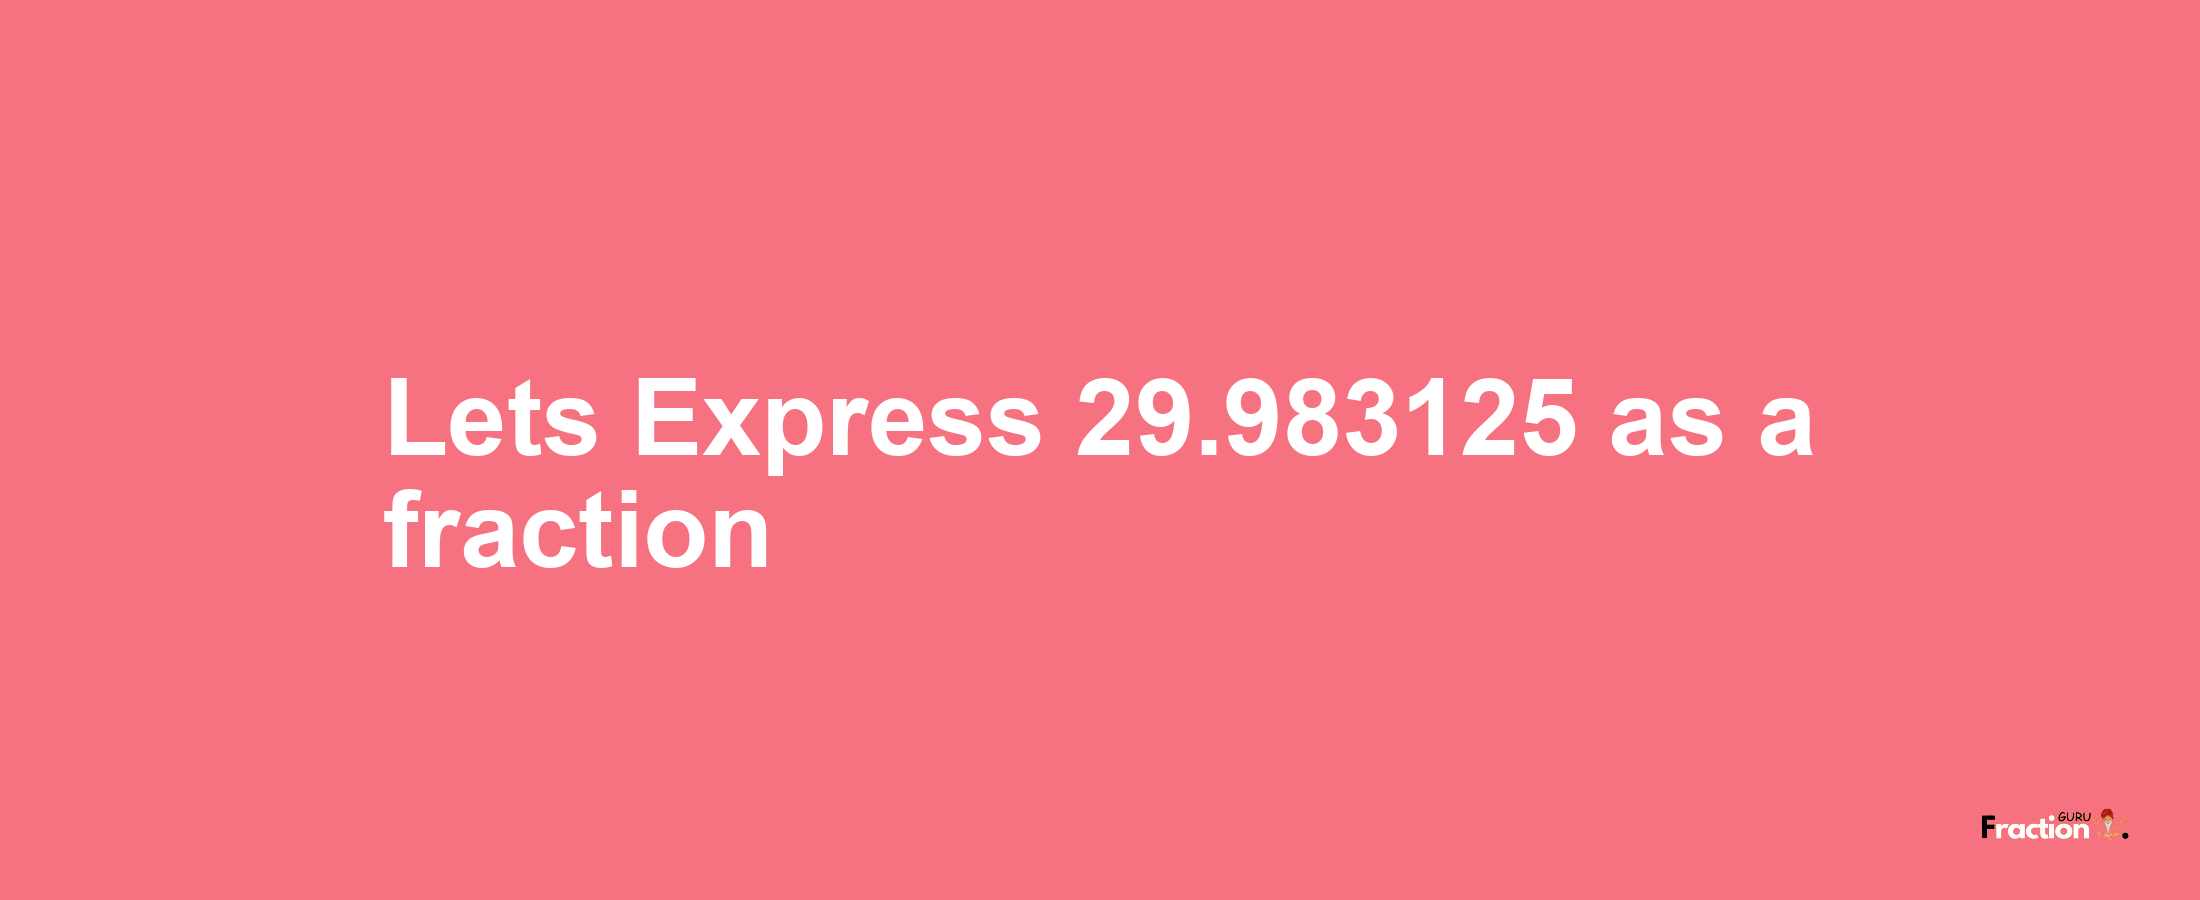 Lets Express 29.983125 as afraction